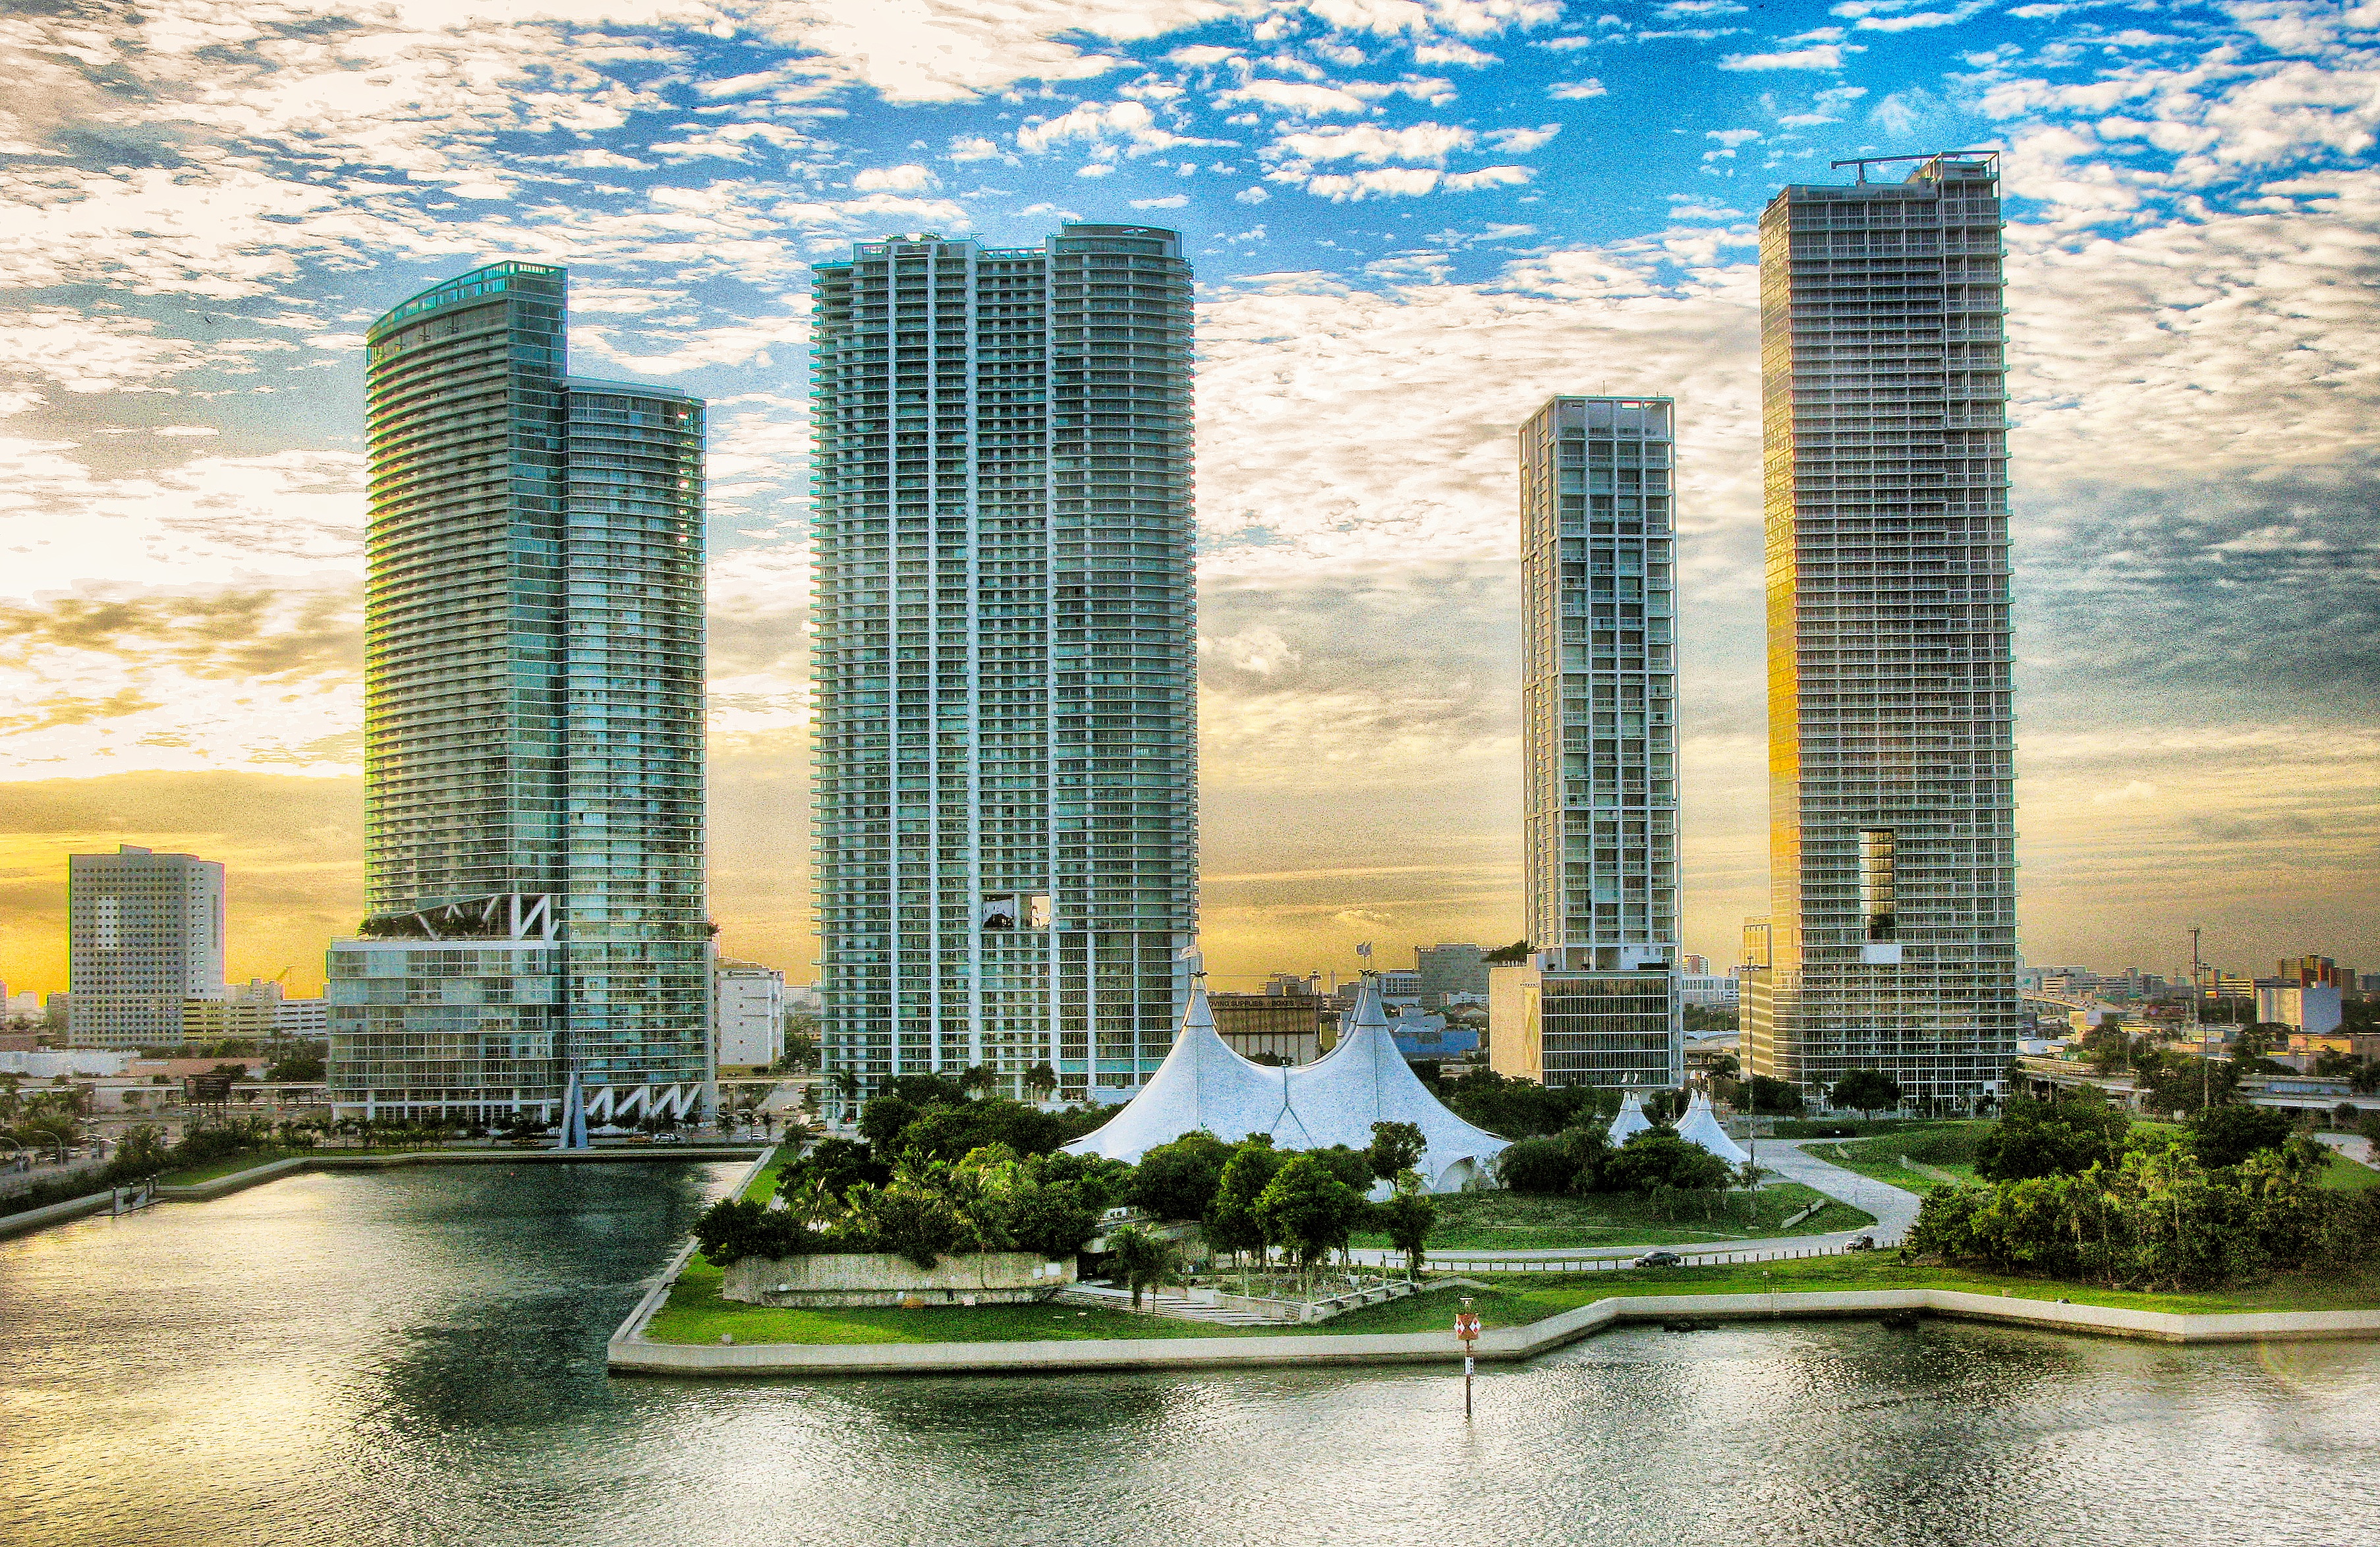 Free photo Miami high-rises on the beach in the evening